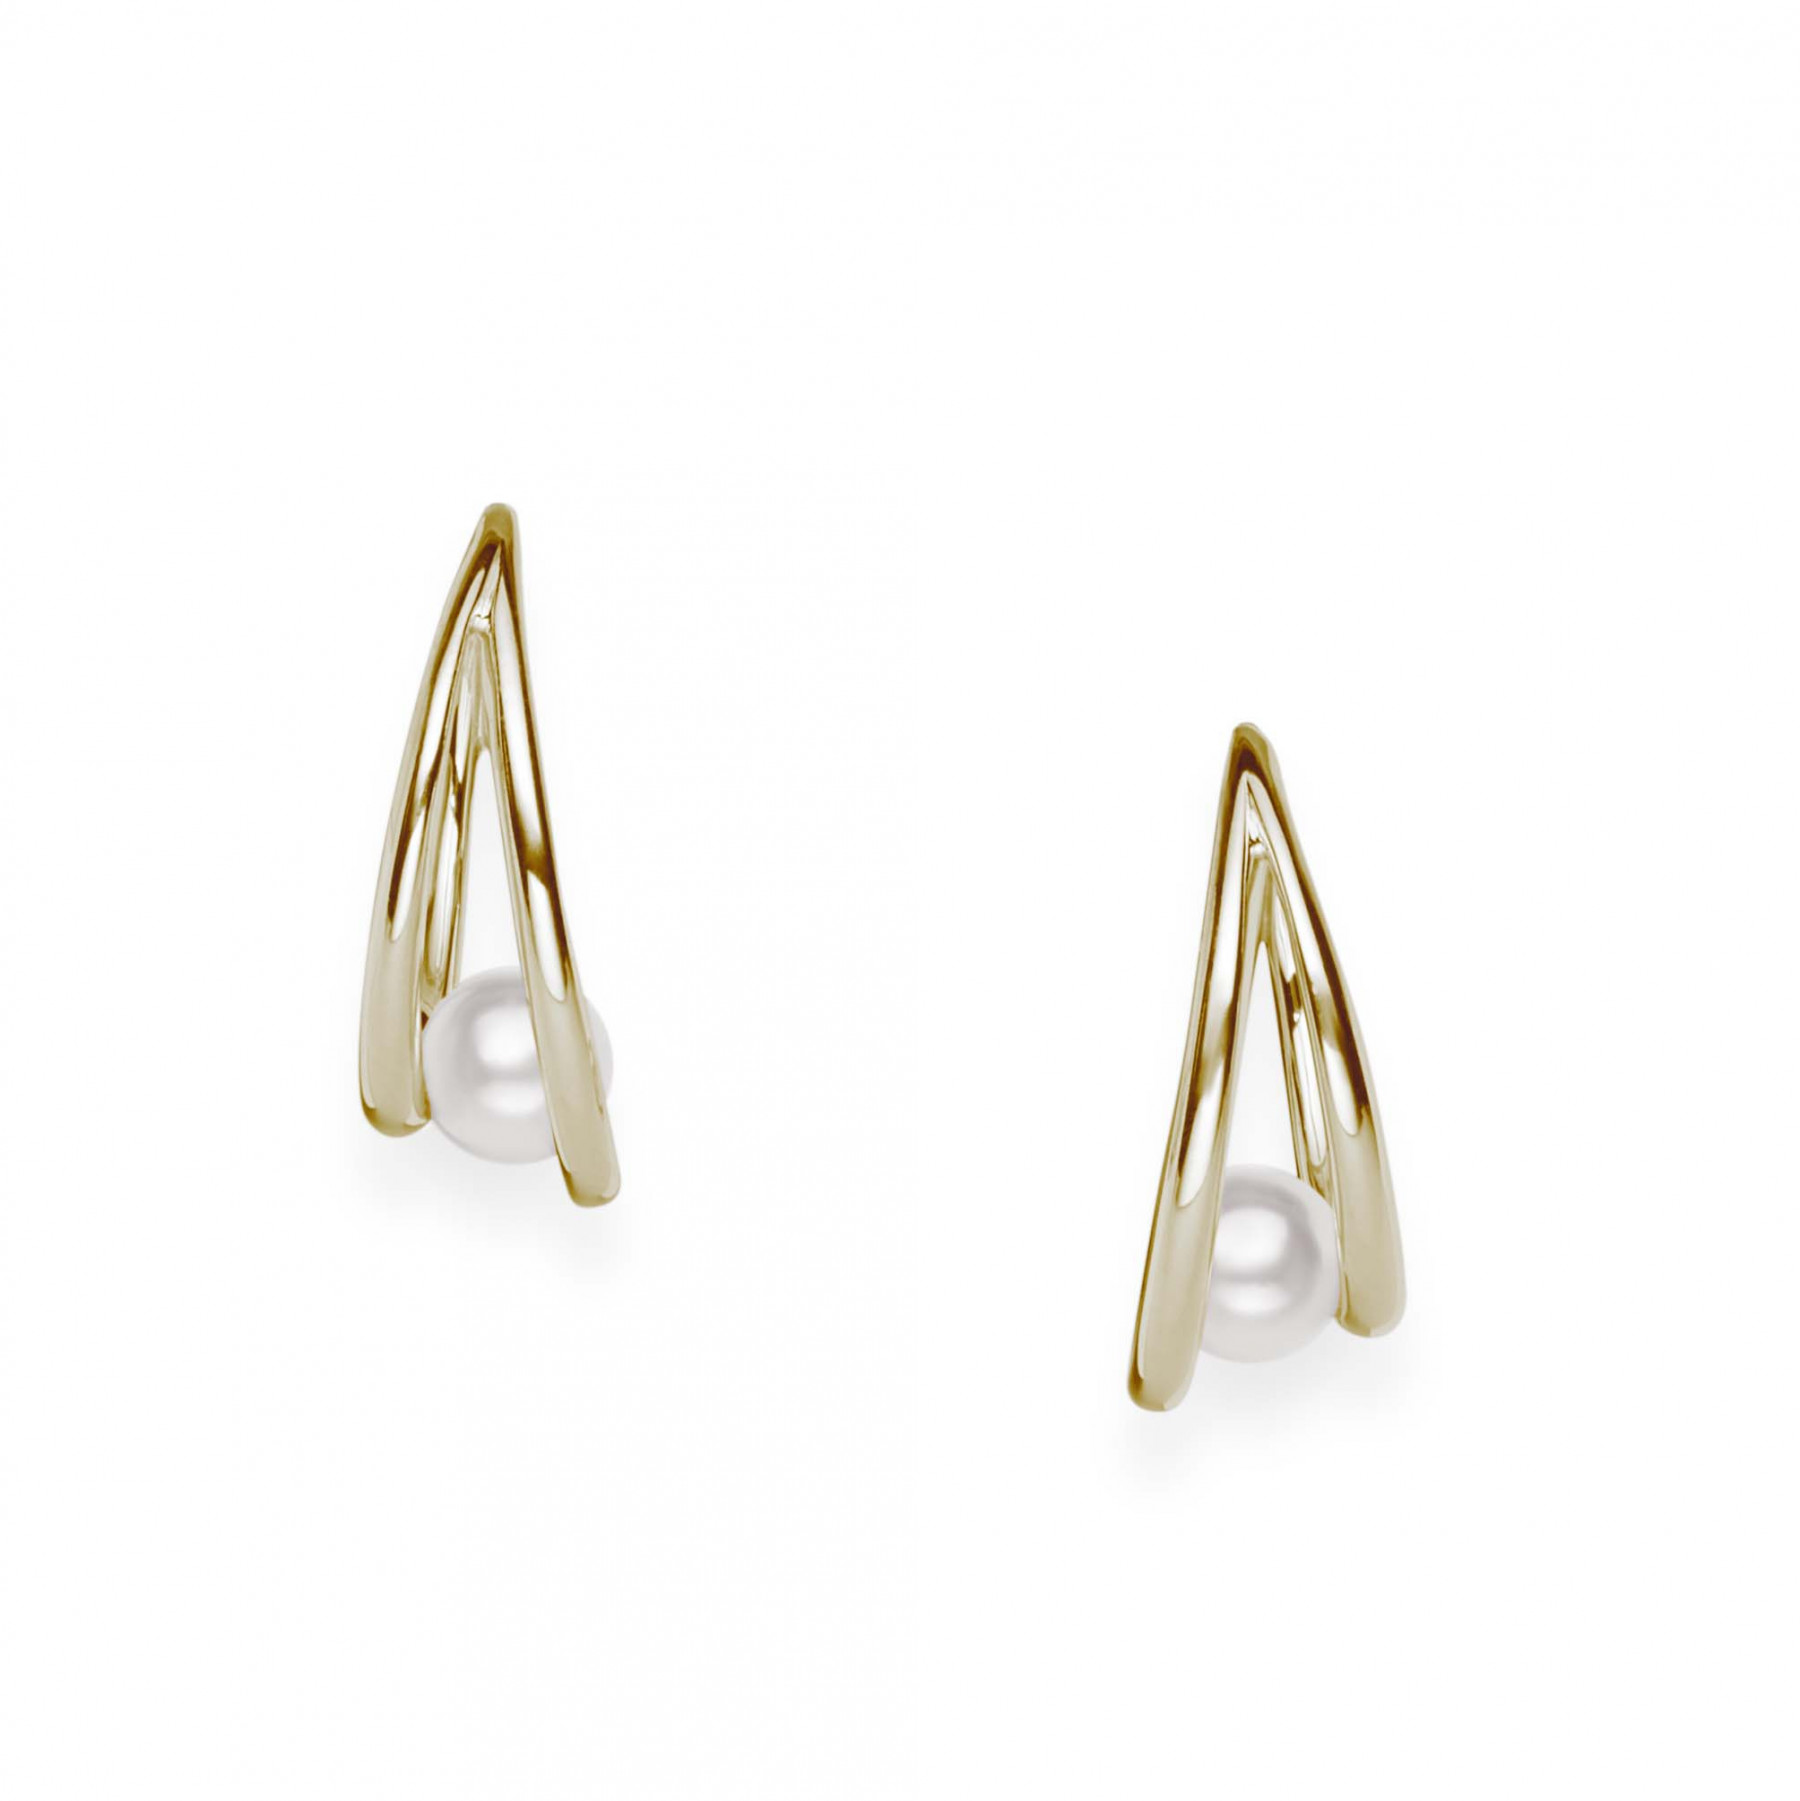 Mikimoto Akoya Cultured Pearl Earrings in Yellow Gold
With 2= Round 6mm Akoya A+  Pearls